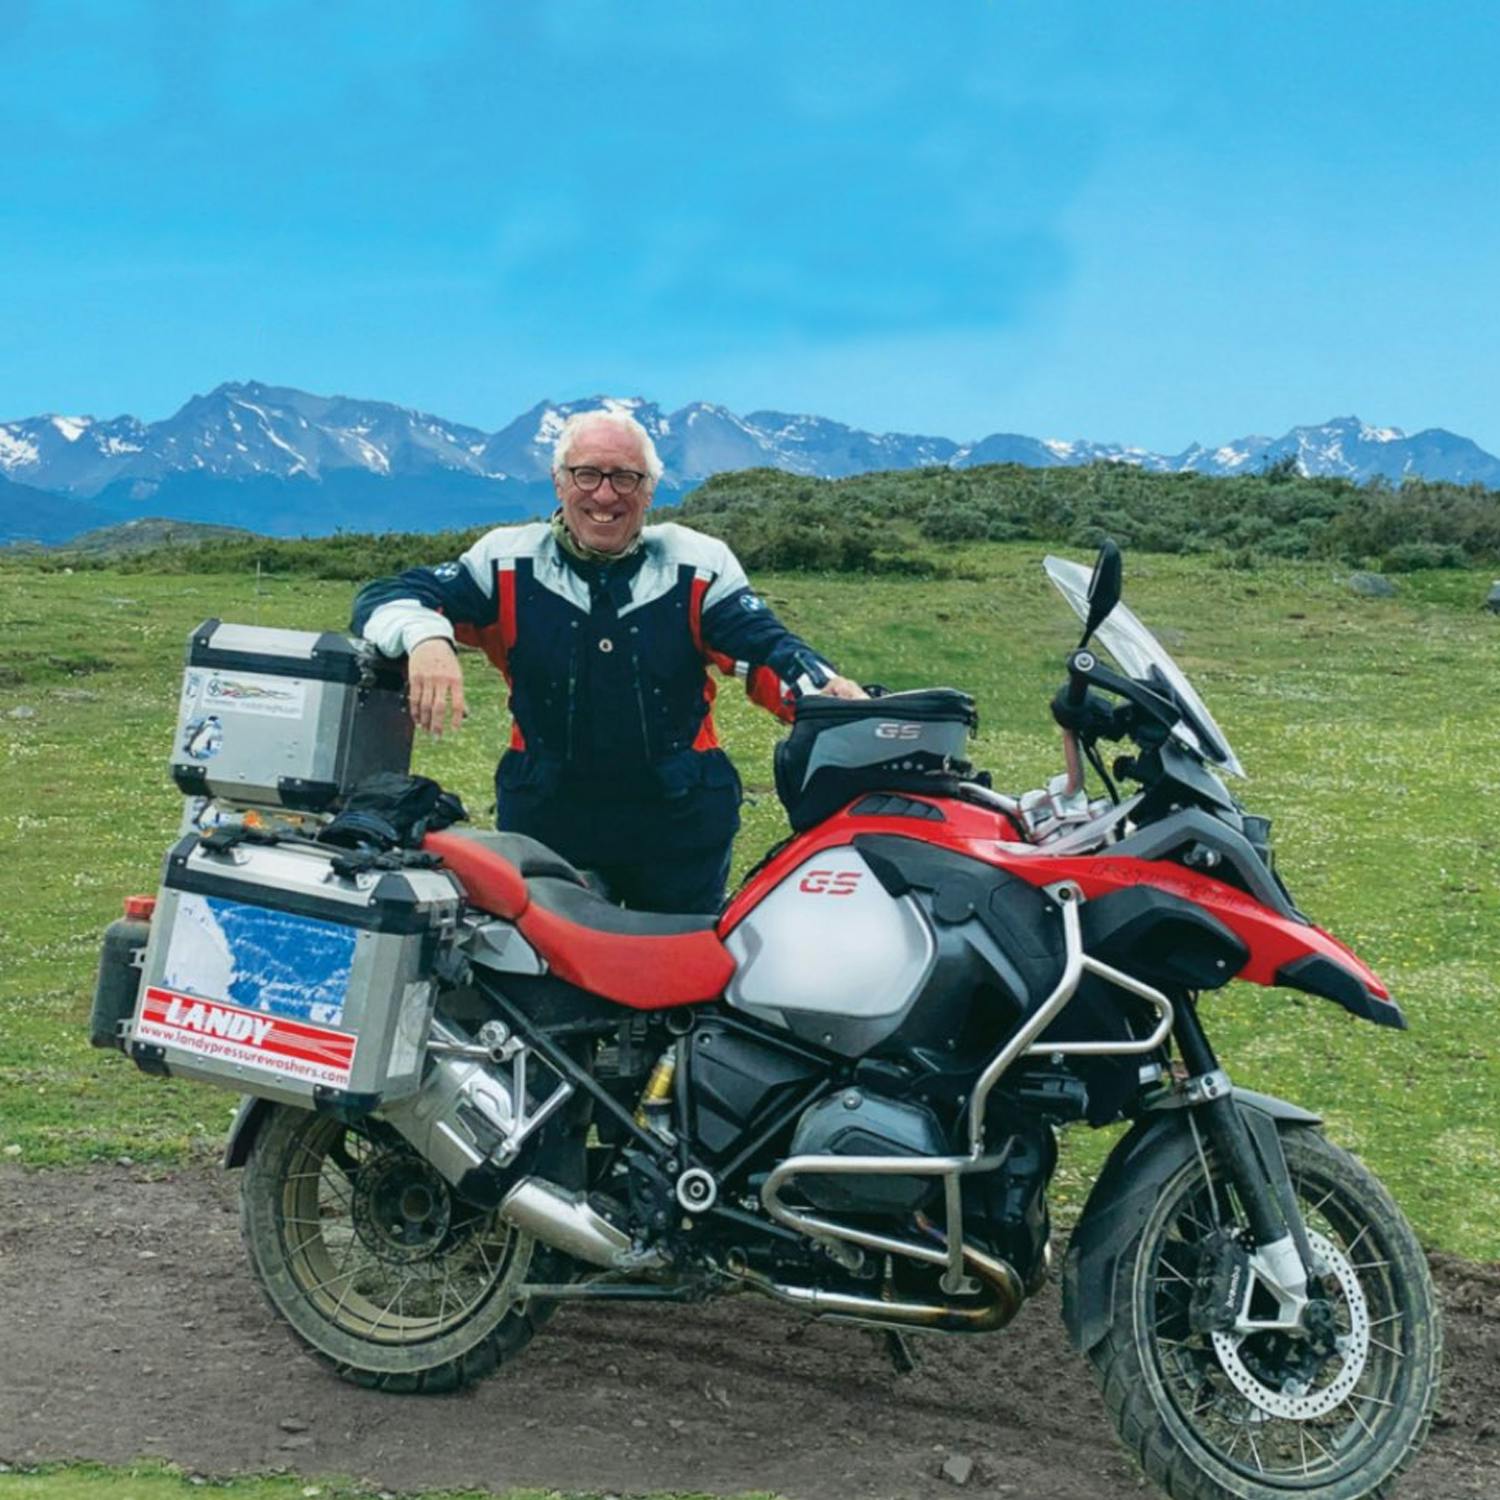 This man drove the full length of America on a motorbike